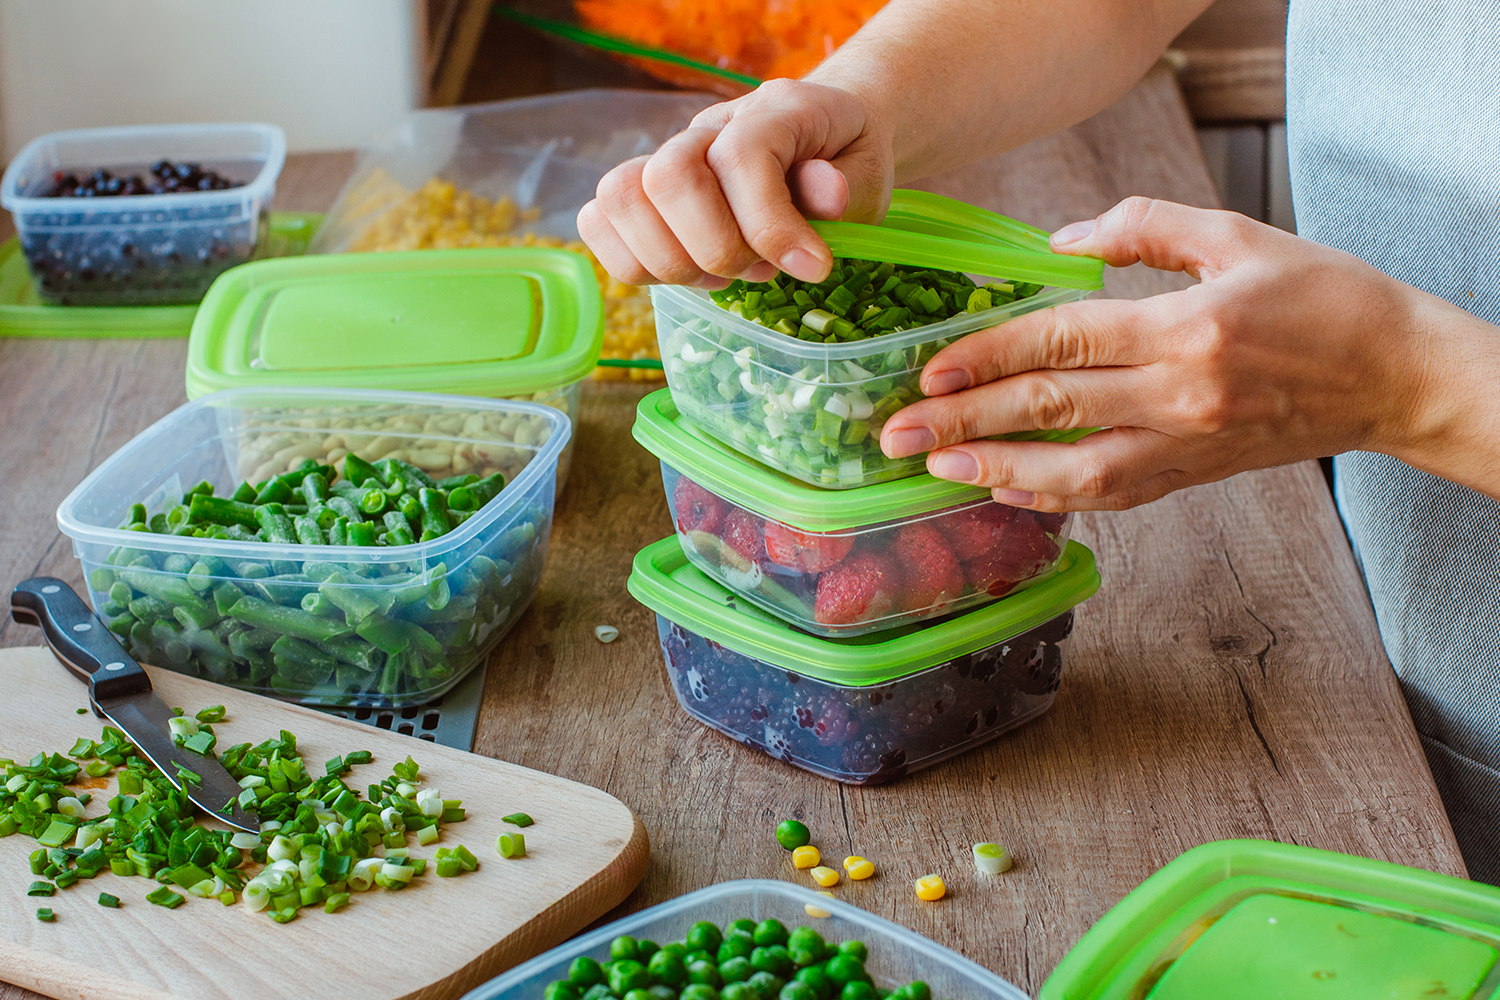 The 12 Best Meal Prep Containers So Your Food Can Last Longer - The Manual